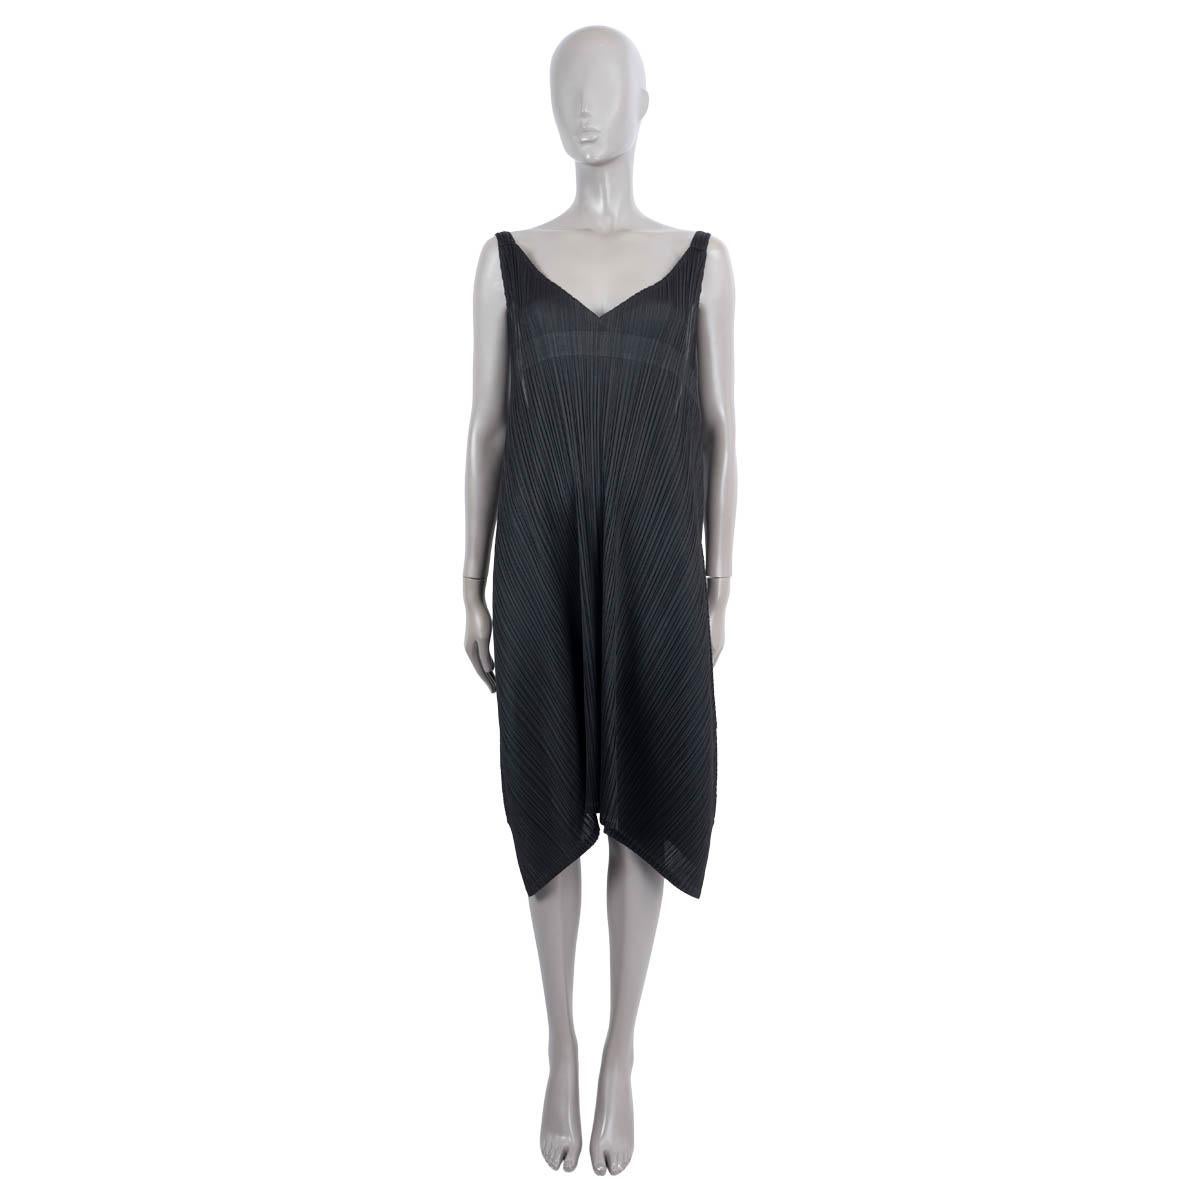 100% authentic Issey Miyake Pleats Please sleeveless A-Line dress in black polyester (100%). Shoulder-straps can be adjusted. Unlined and two short slits on the side. Has been worn and is in excellent condition. 

Measurements
Model	PP86-JH226
Tag